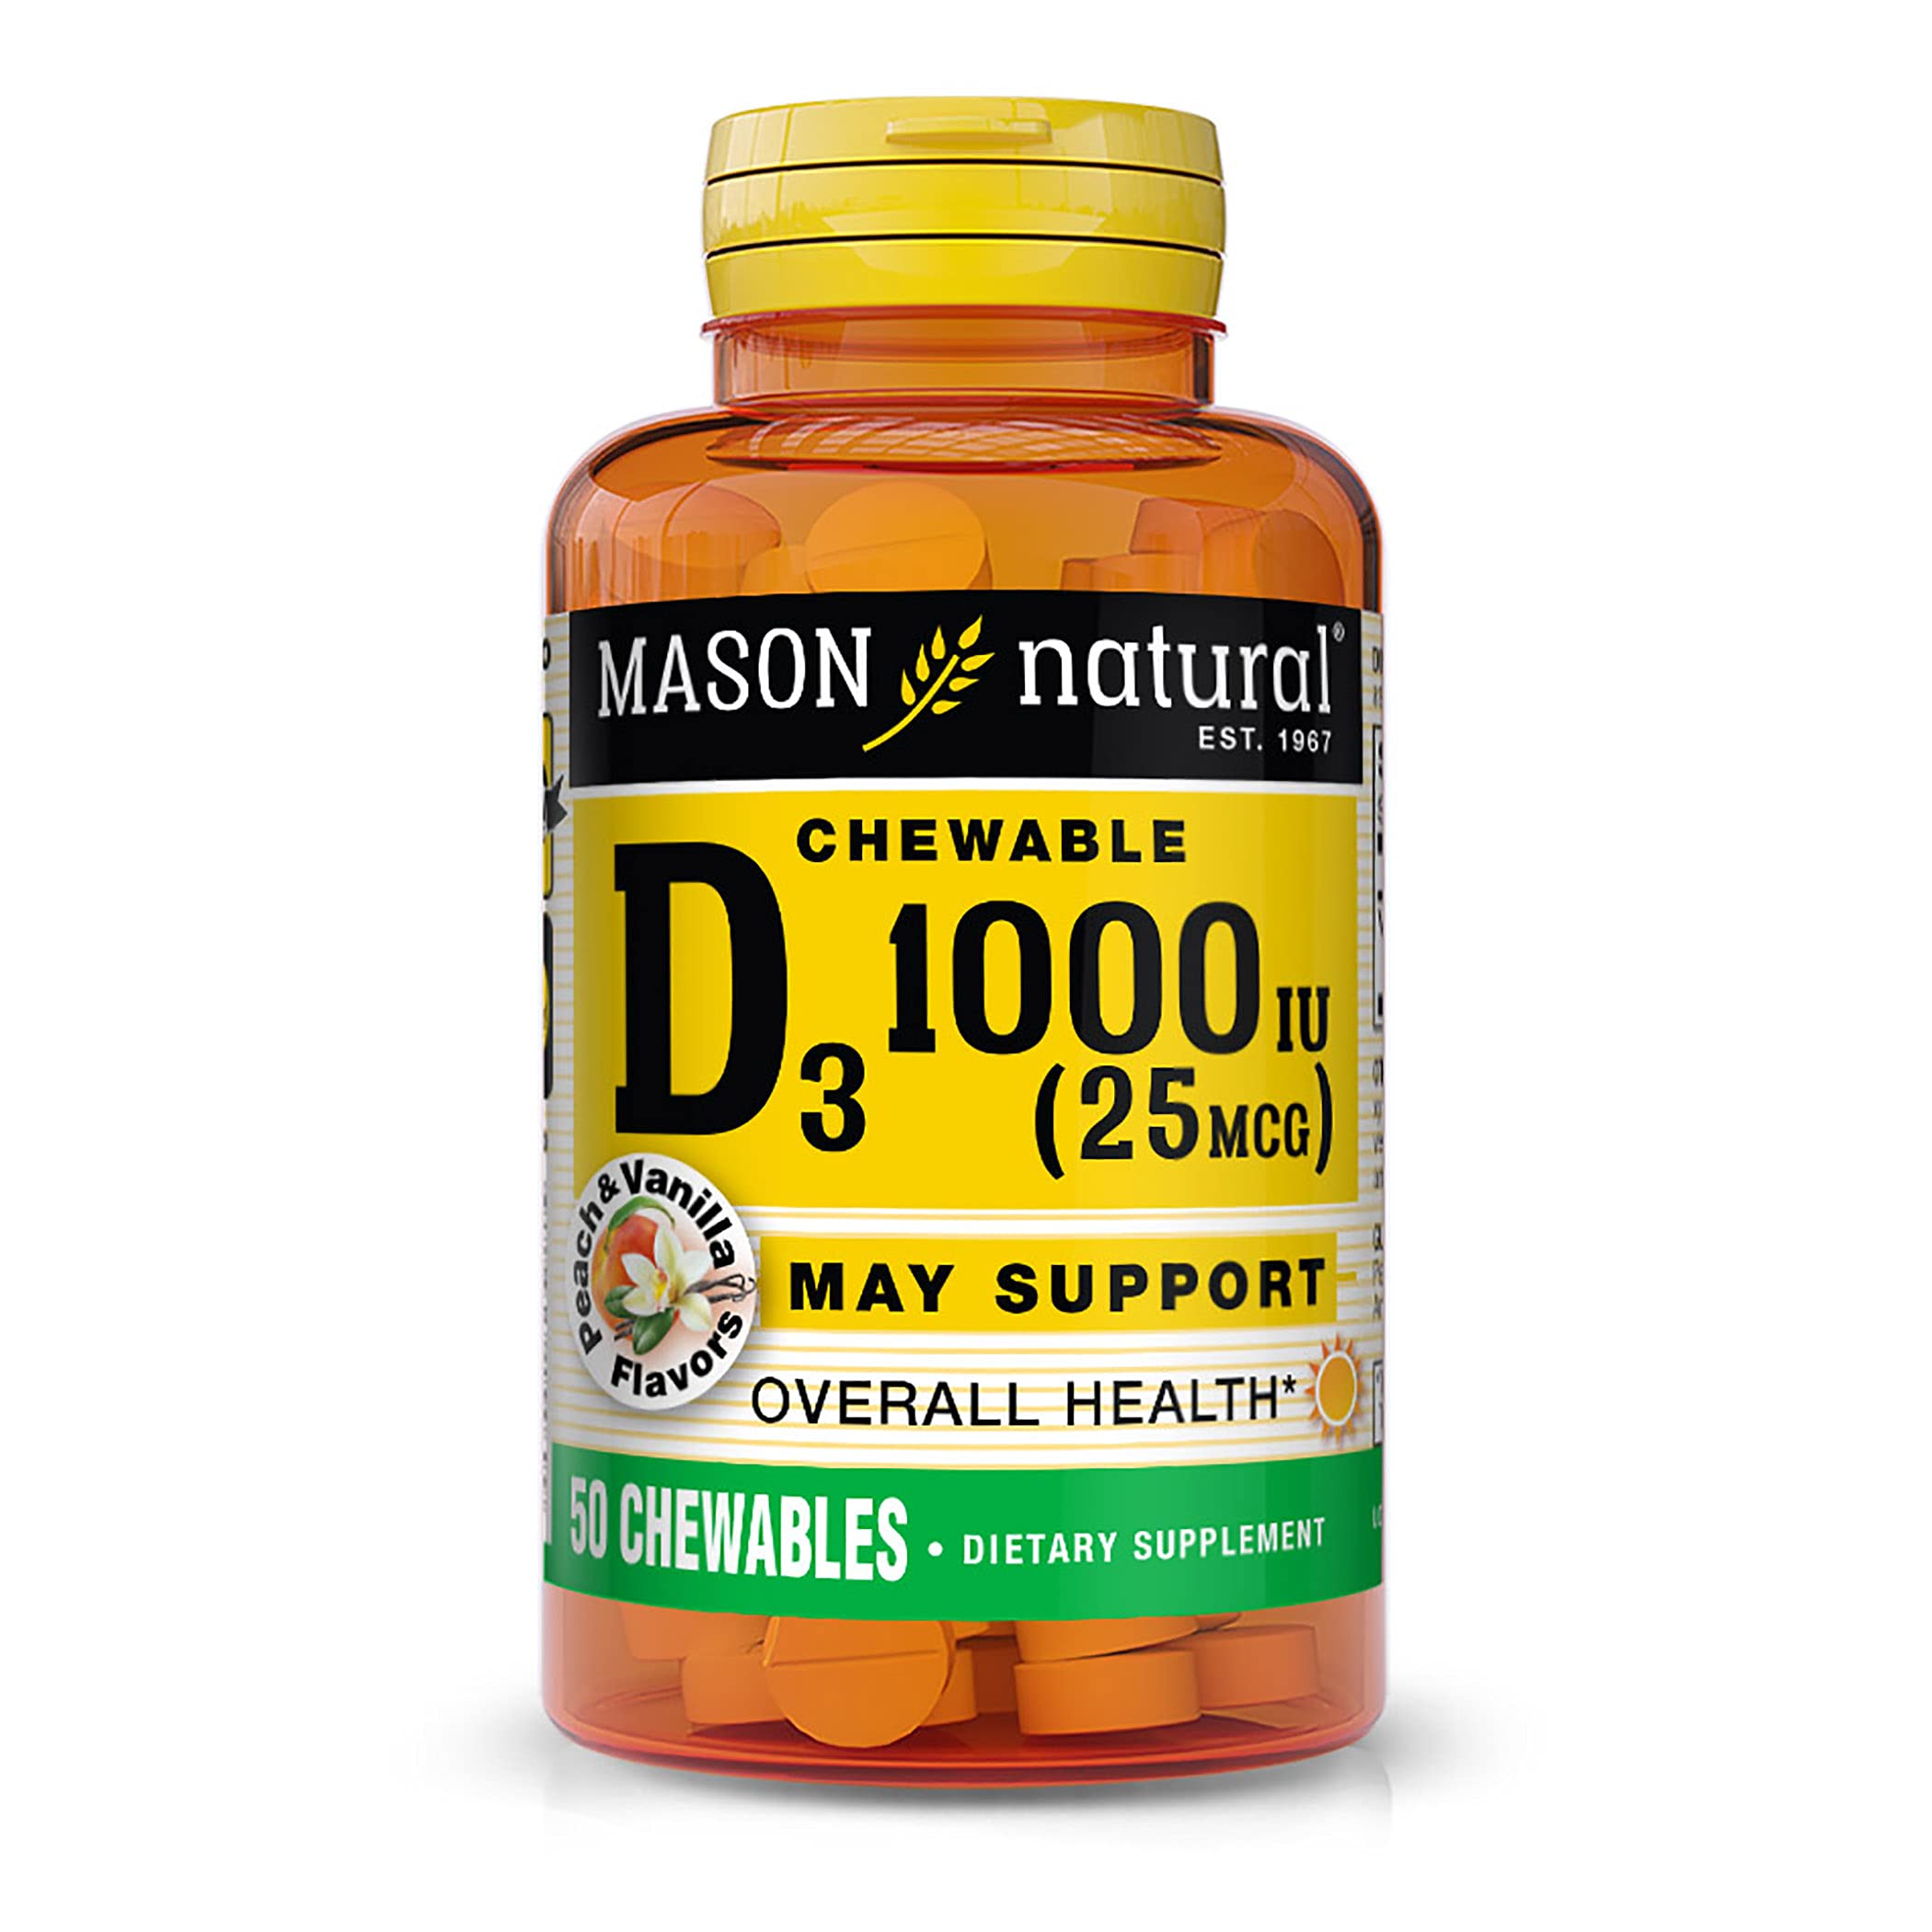 MASON NATURAL Vitamin D3 25 mcg (1000 IU) - Supports Overall Health, Strengthens Bones and Muscles, Peach Vanilla Flavor, 50 Chewables